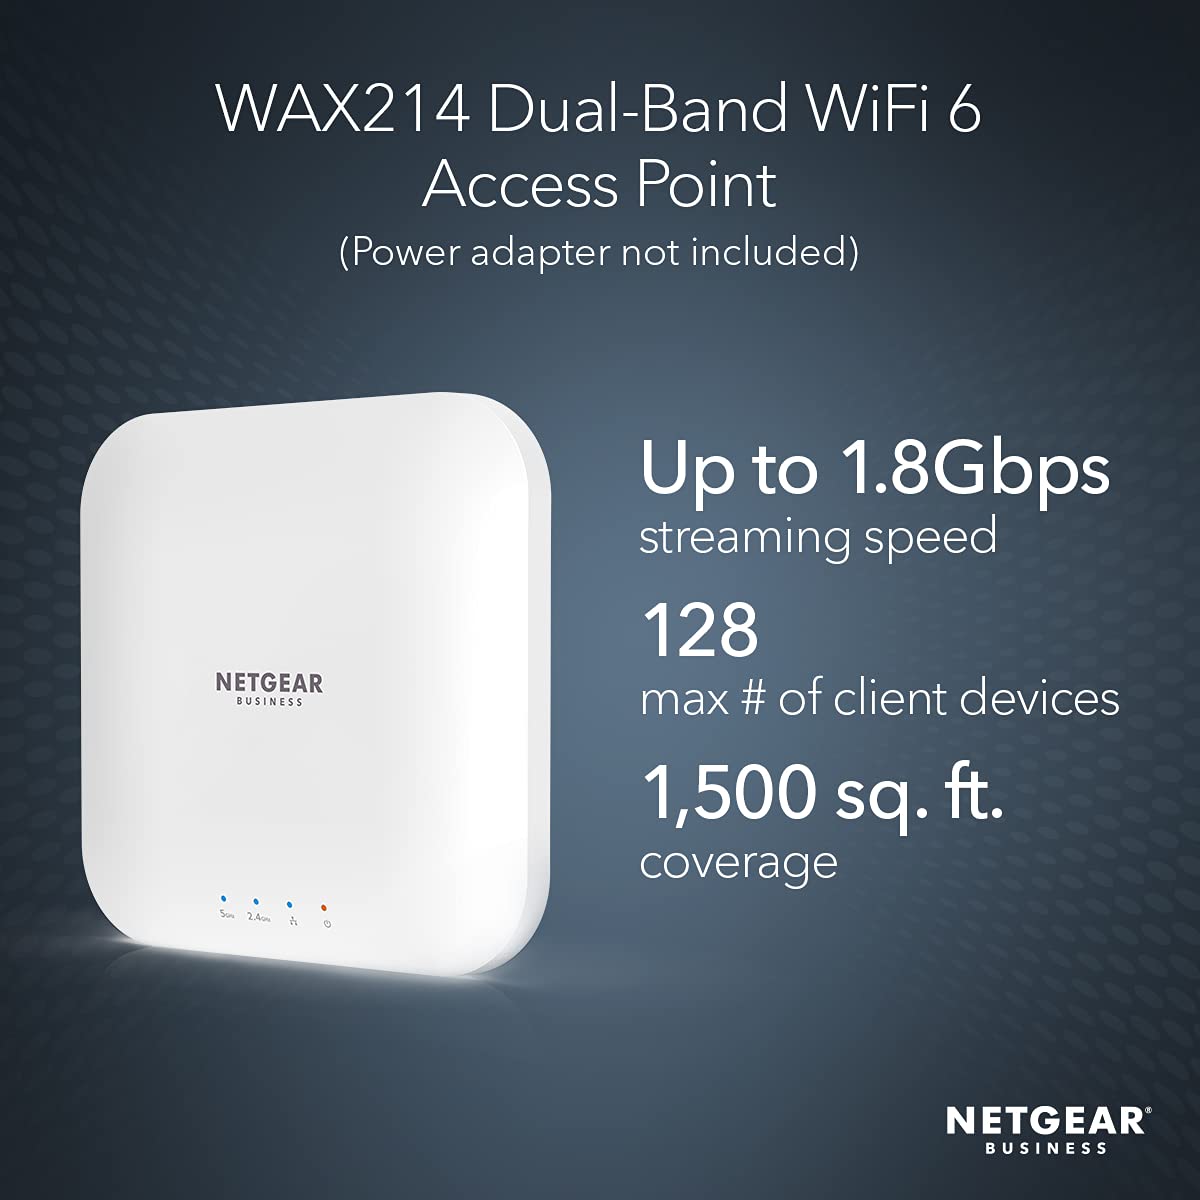 NETGEAR Wireless Access Point (WAX214)| WiFi 6 Dual-Band AX1800 Speed | 1 x 1G Ethernet PoE Port| WPA3 Security | Create Up to 4 Separate Wireless Networks |Ceiling and Wall Mount